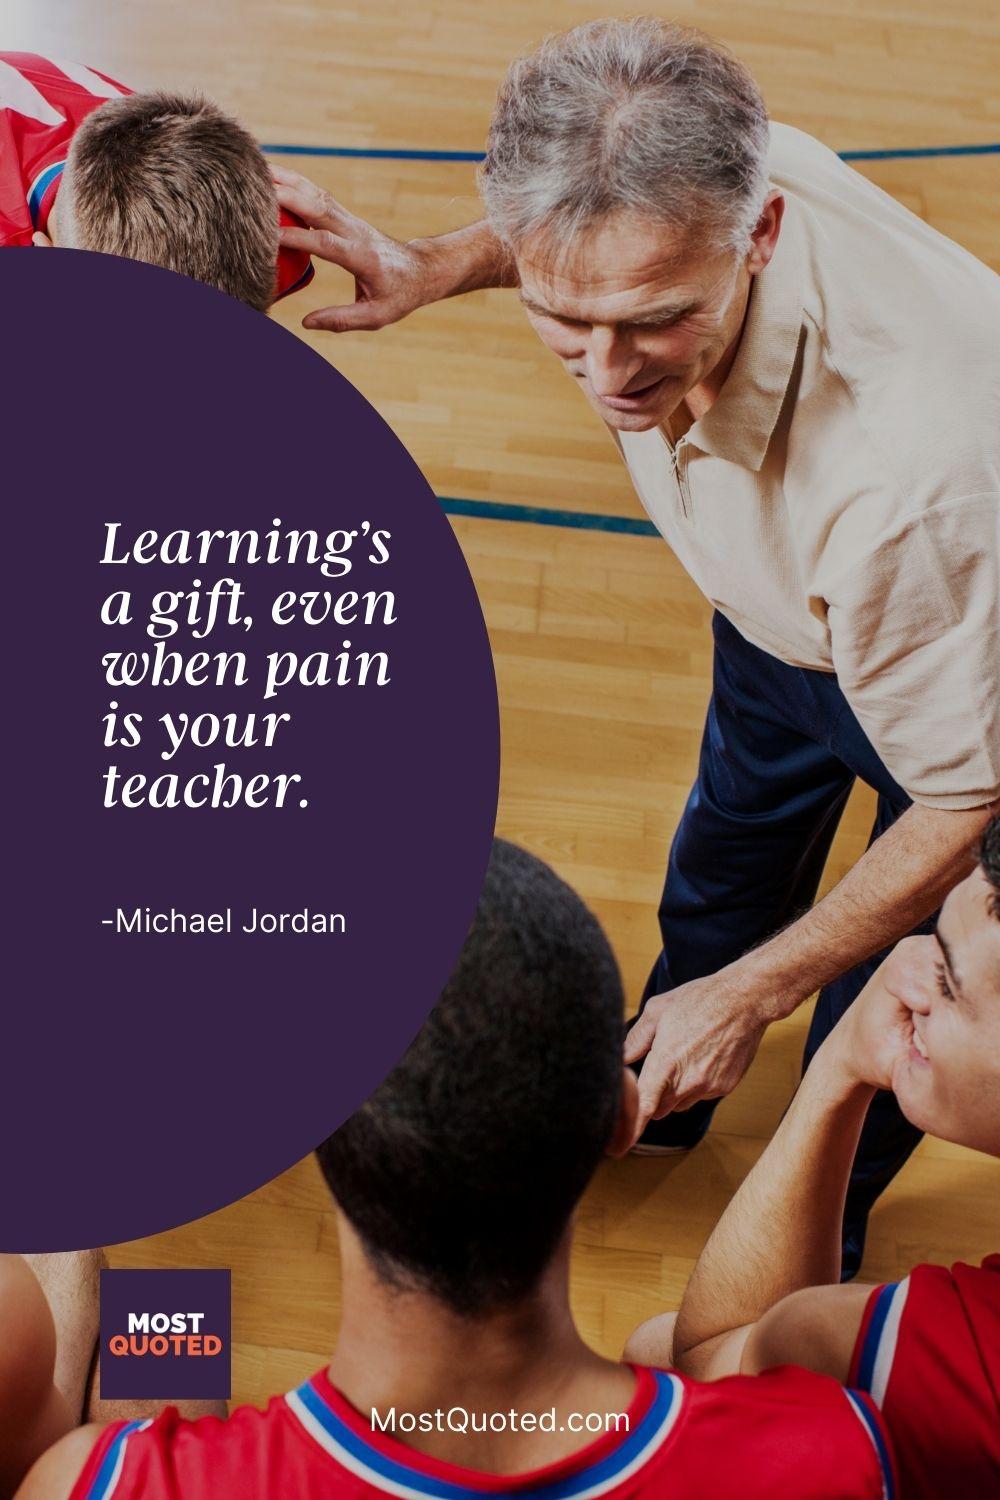 Learning’s a gift, even when pain is your teacher. - Michael Jordan